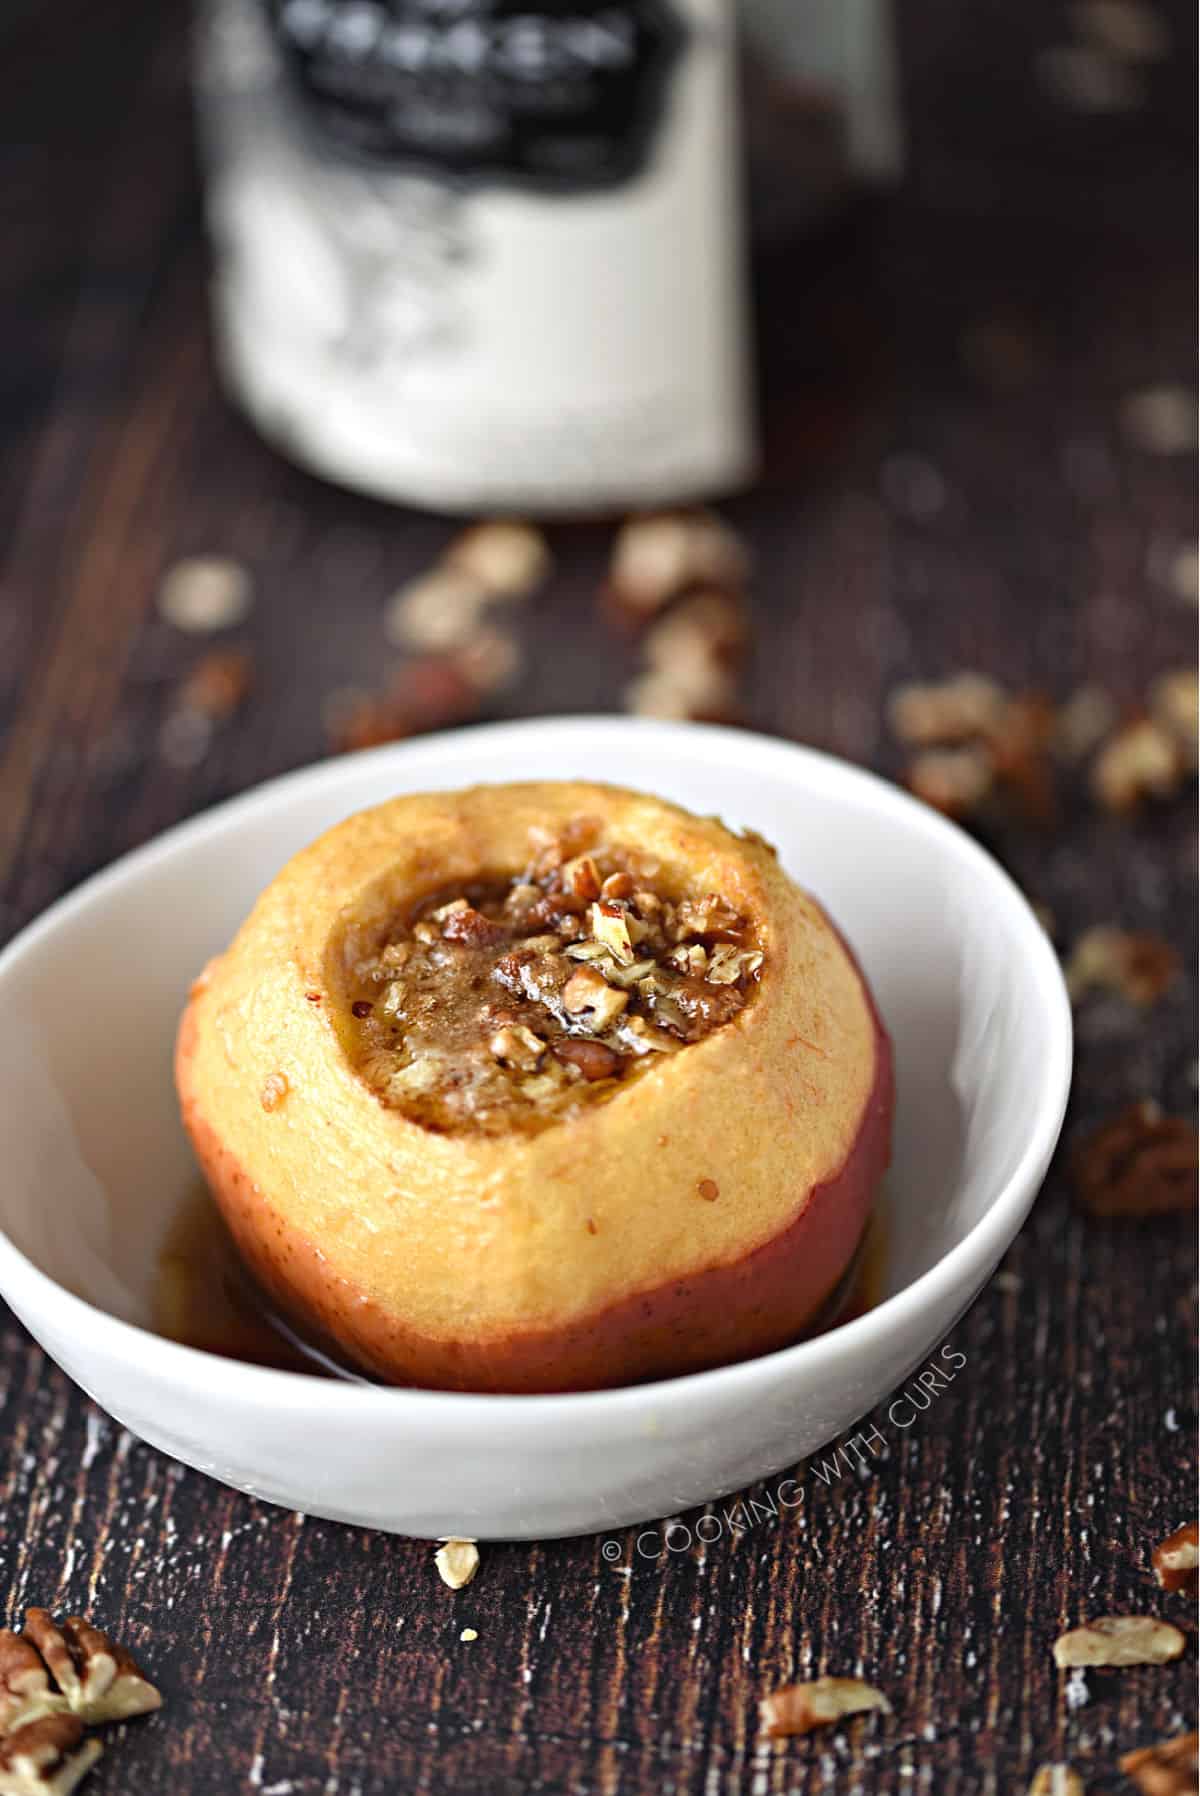 Spiced Rum Baked Apples filled with oats, pecans, brown sugar and butter in a small white bowl with a bottle of spiced rum in the background.